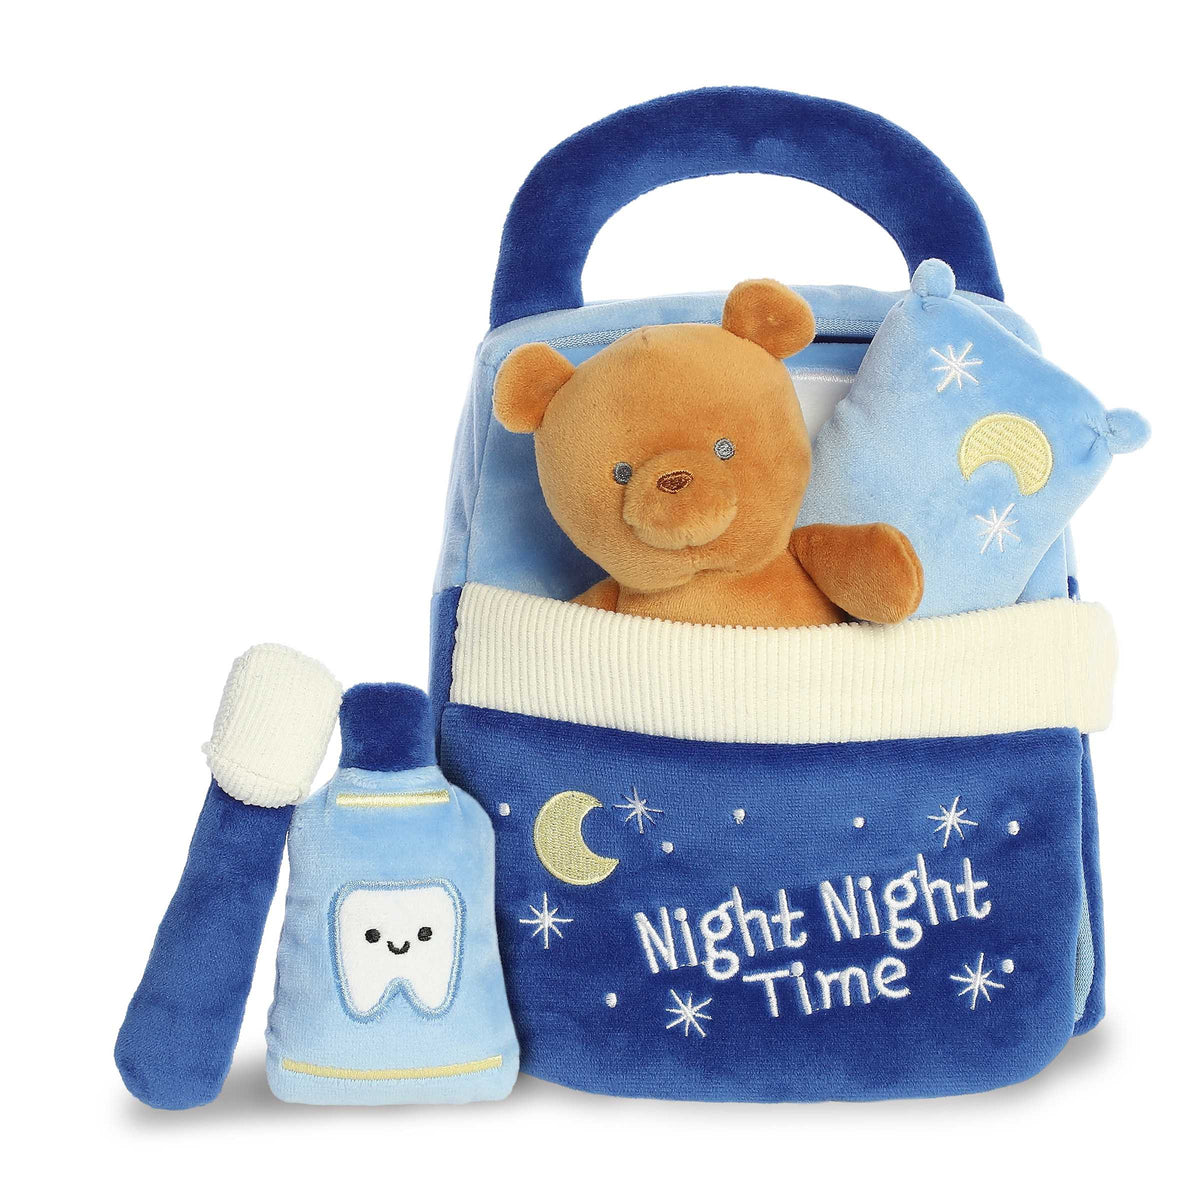 Plush pillow, teddy, and milk bottle in a bedtime book bag, each with gentle sounds, crafted for soothing play, by ebba.